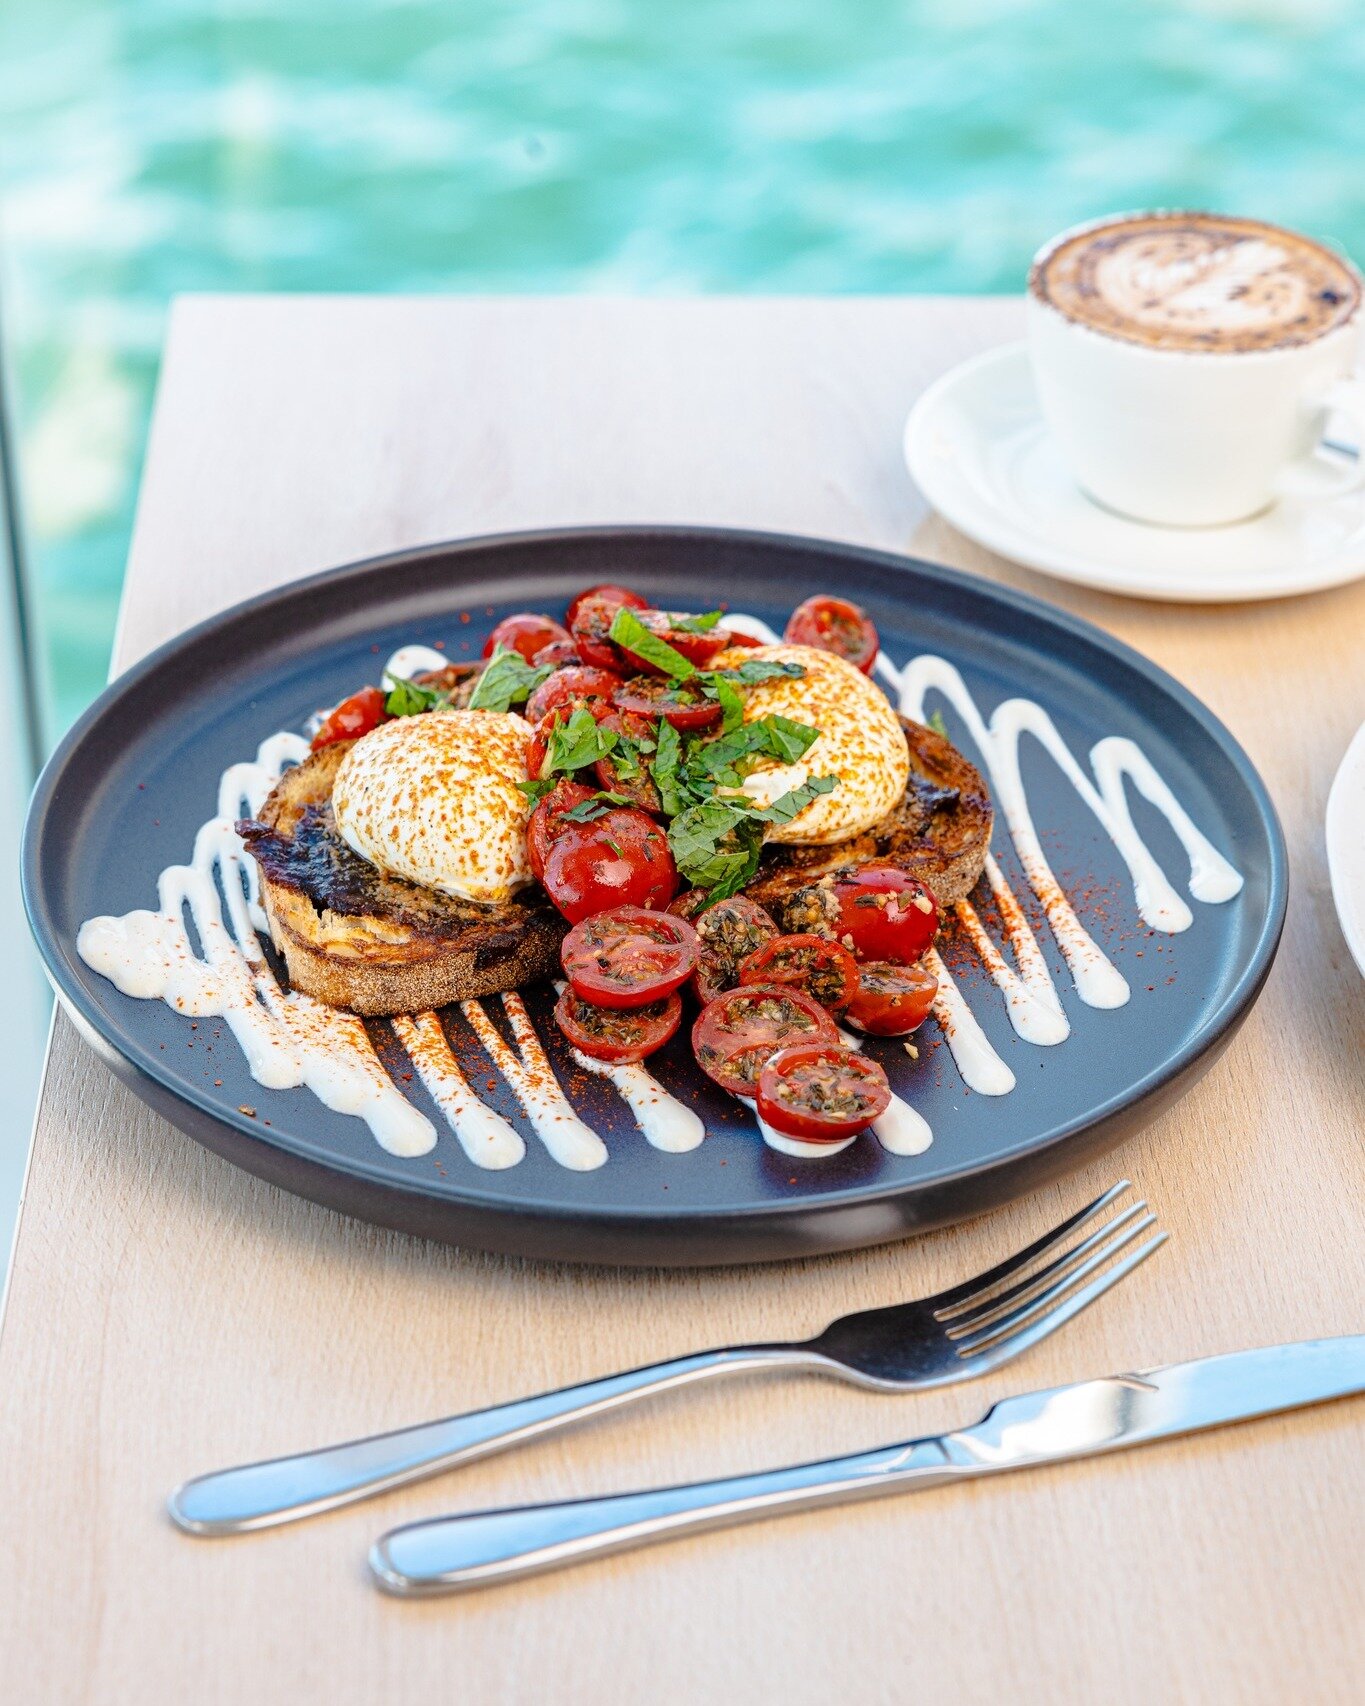 What's on Billi's Eggs? 

Chilli buttered eggs, braised garlic tomatoes, onion jam, burnt butter glaze, fresh mint and Greek yoghurt on toasted sourdough.

#CelsiusCoffeeCo

#sydneycoffee #sydneycafe #coffeeshop #cafes #waterviews  #sydneybrunchspots